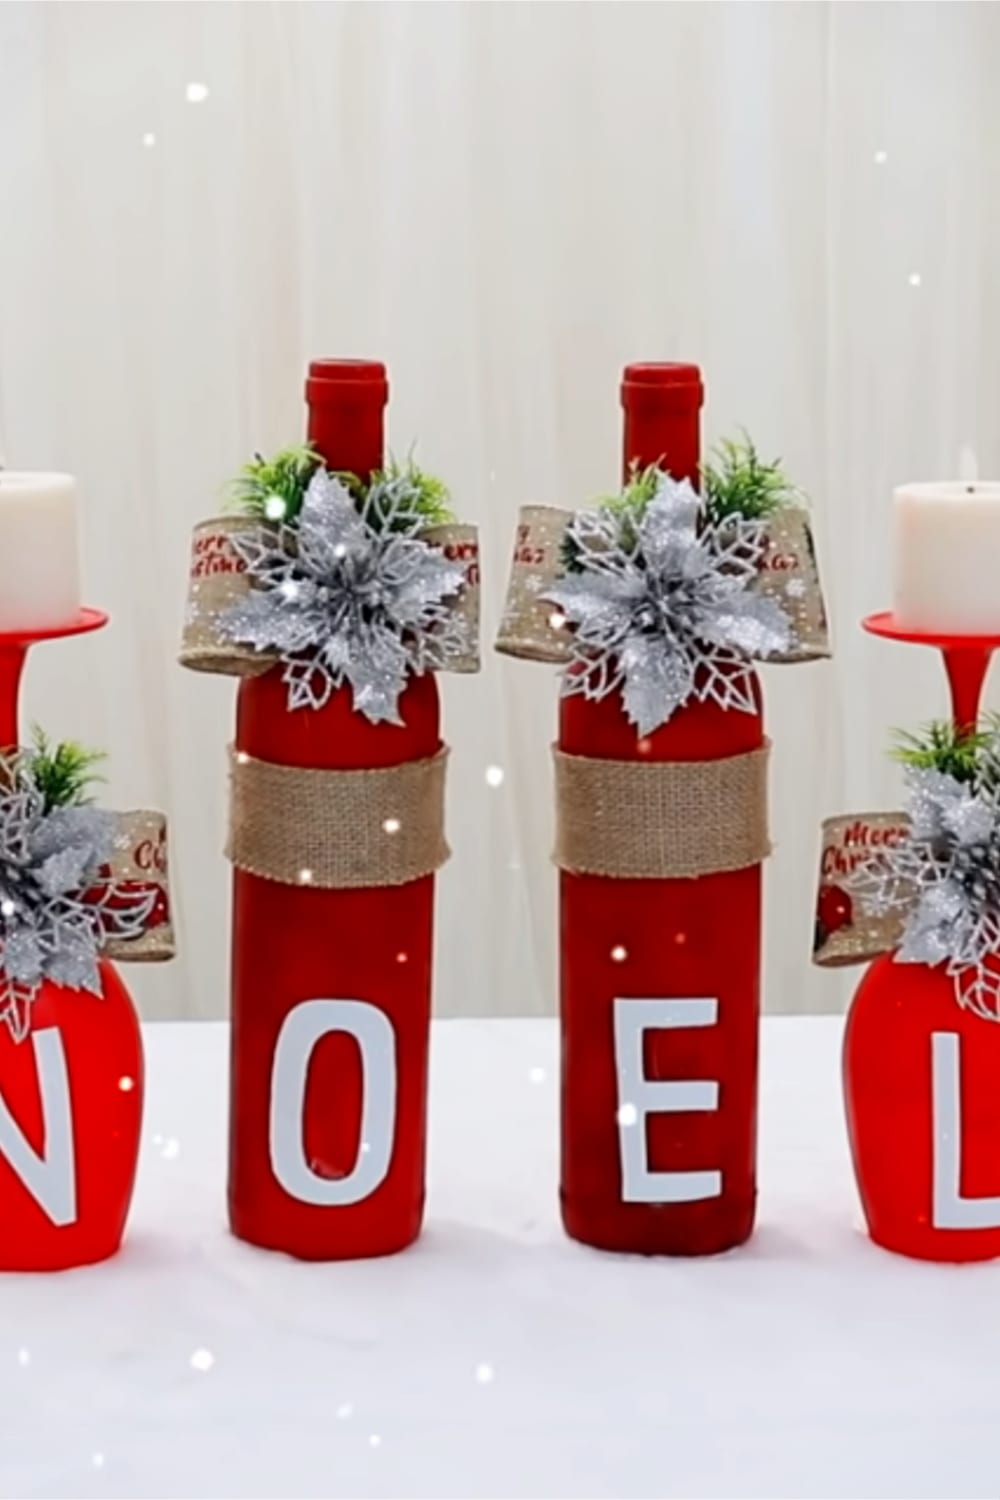 Christmas crafts for adults-simple Christmas craft ideas for adults to make - like these DIY Noel Christmas candle holders made from wine glasses and empty wine bottles